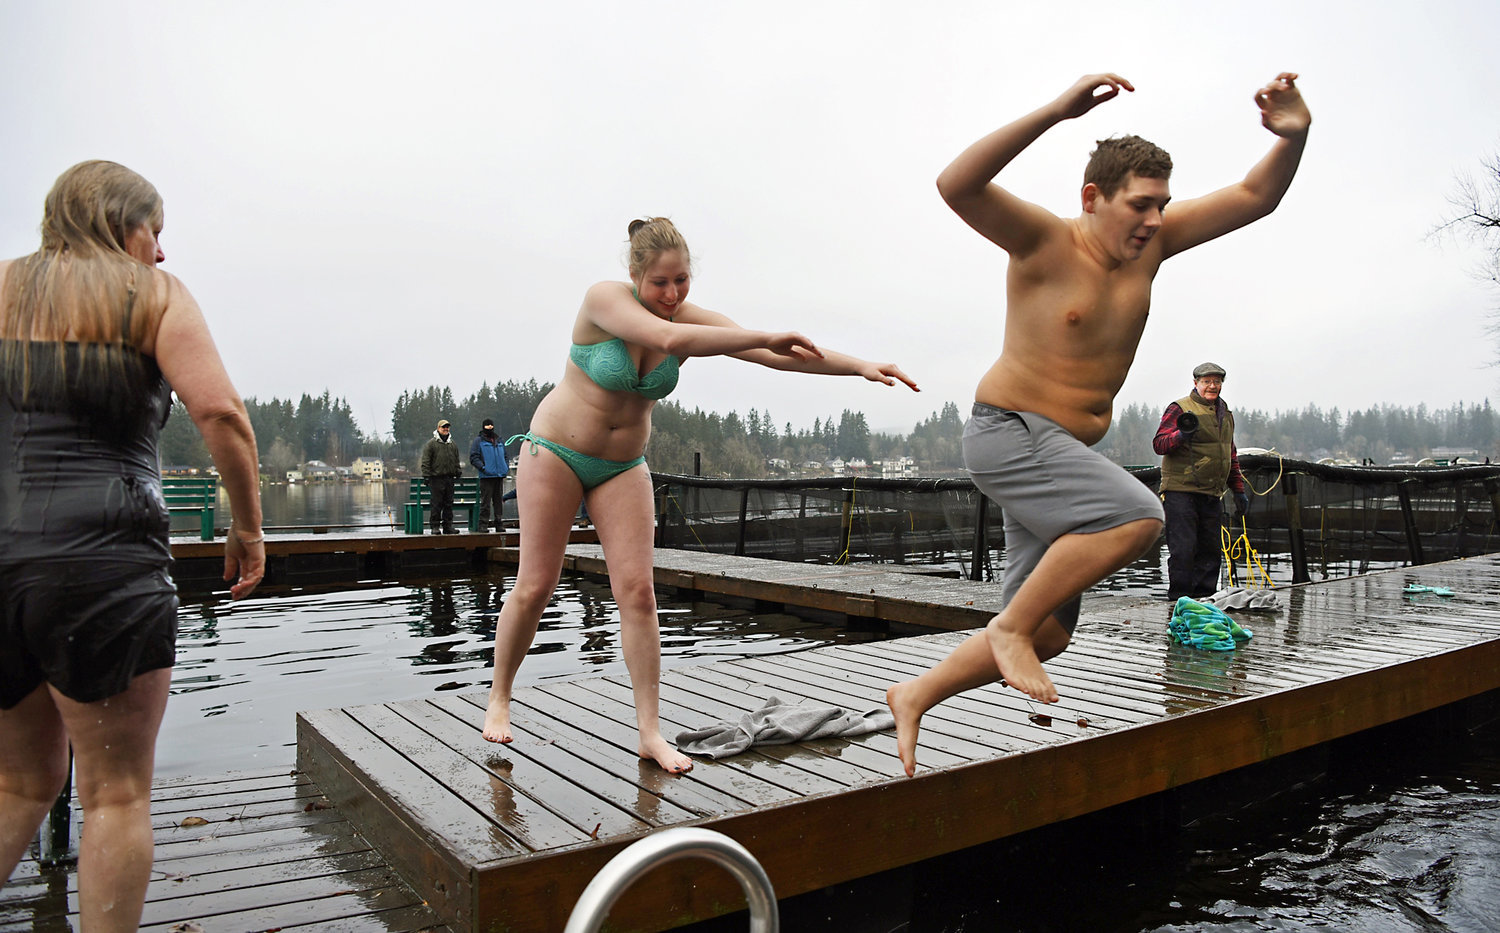 With a little help from his plungemate, a participate leaps to his fate New Year's Day during the Offut Lake Resort's annual Polar Bear Plunge in Tenino.